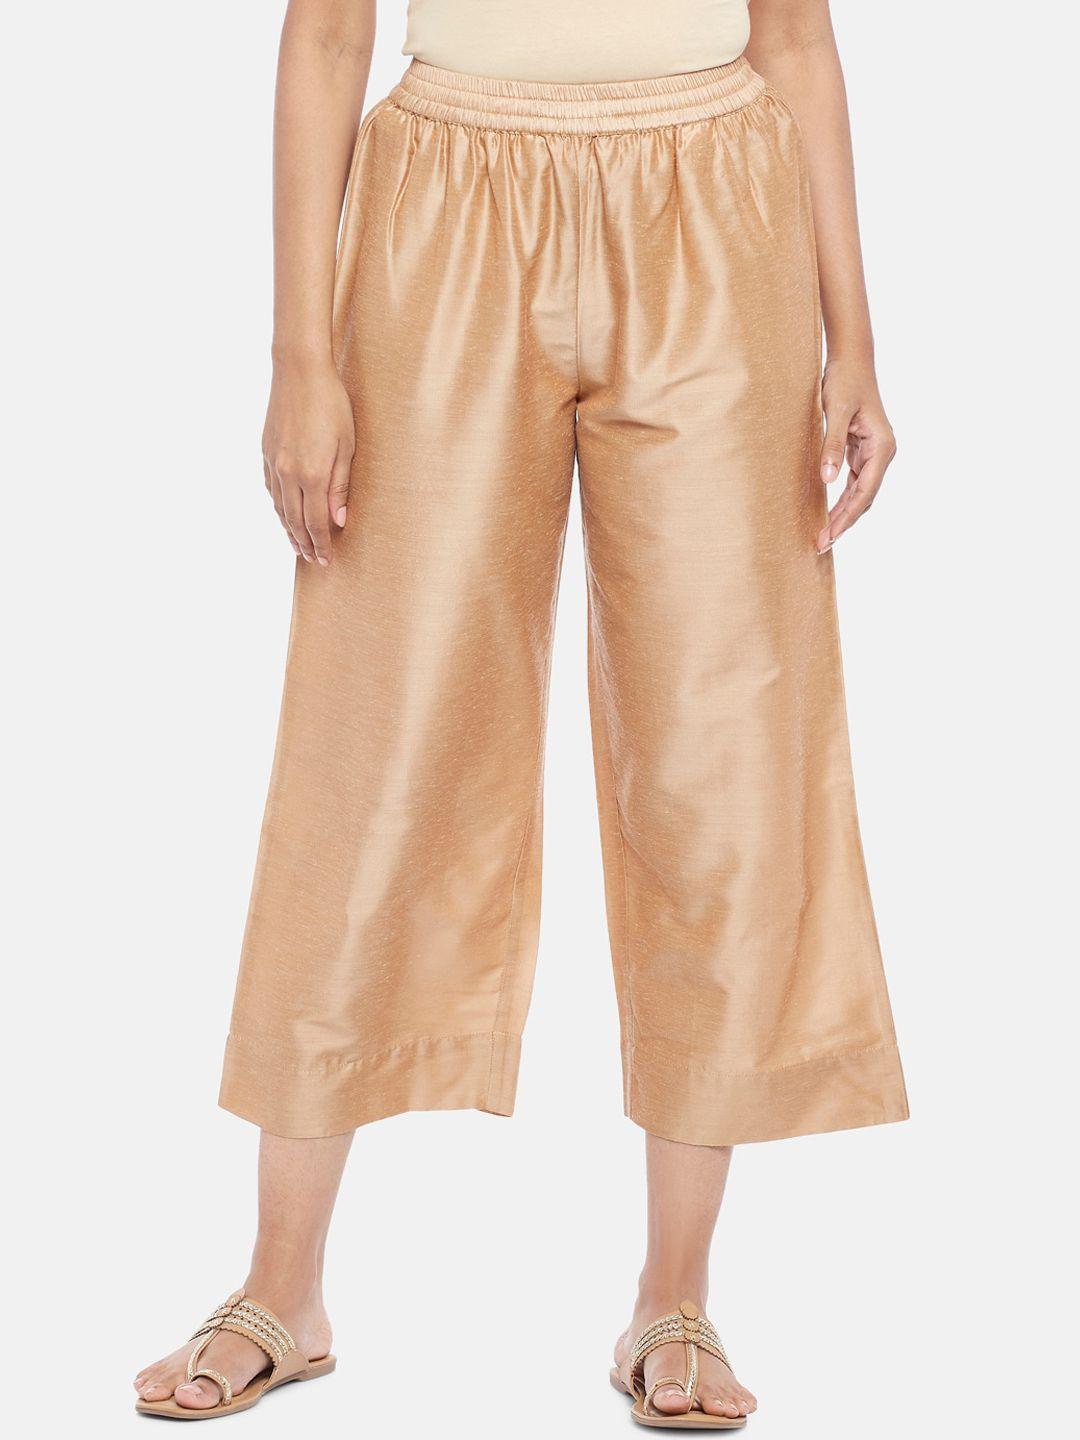 rangmanch-by-pantaloons-women-gold-toned-culottes-trousers